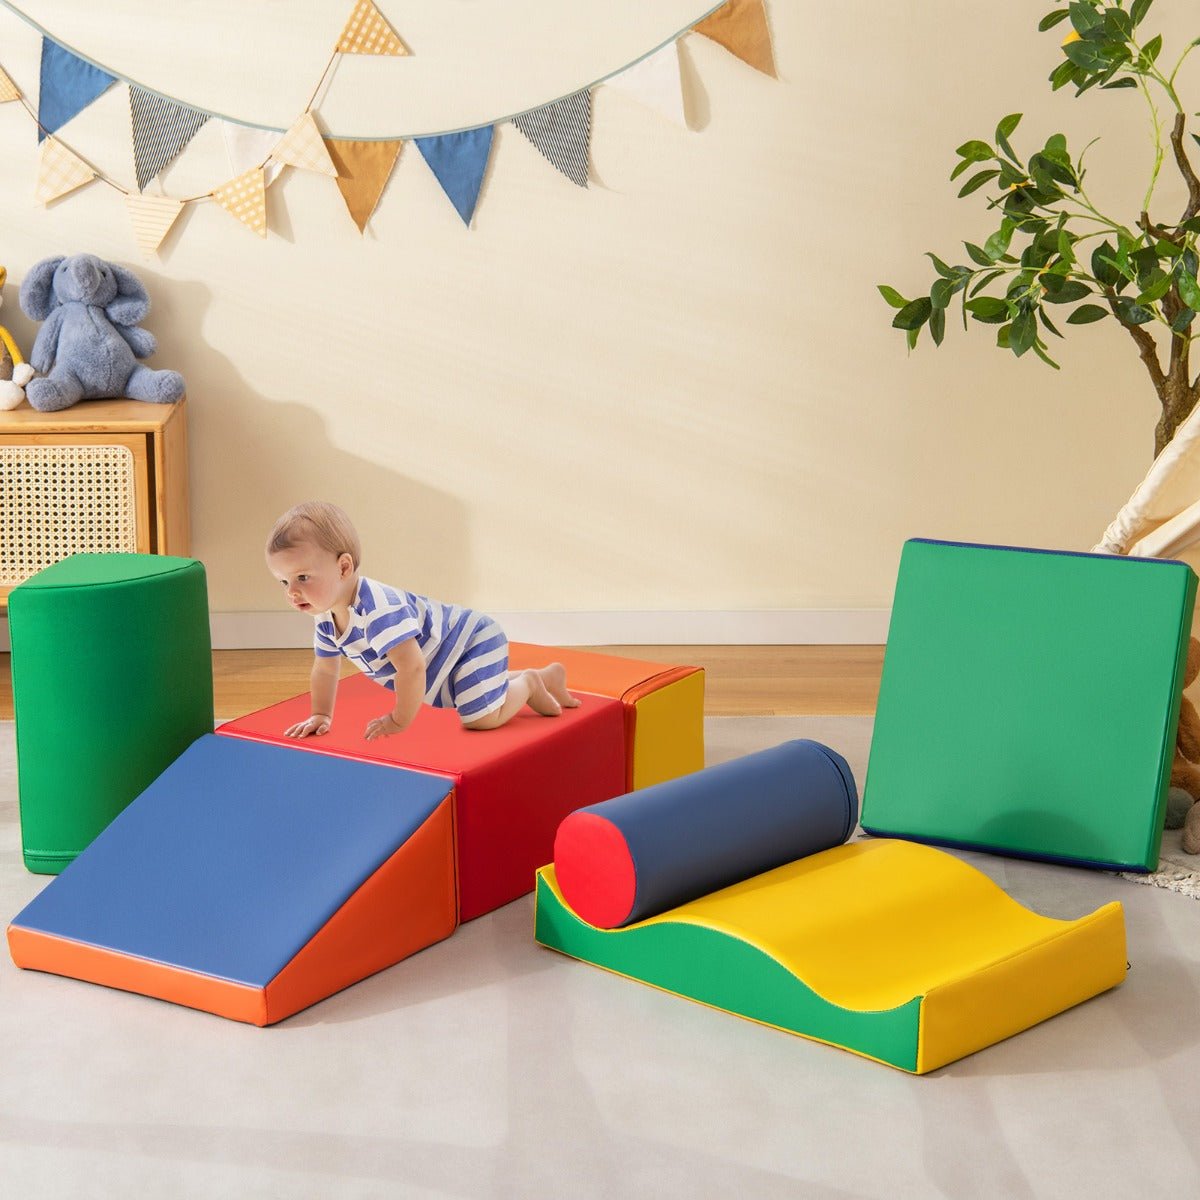 Adventure Awaits with Our 7-Piece Play Set